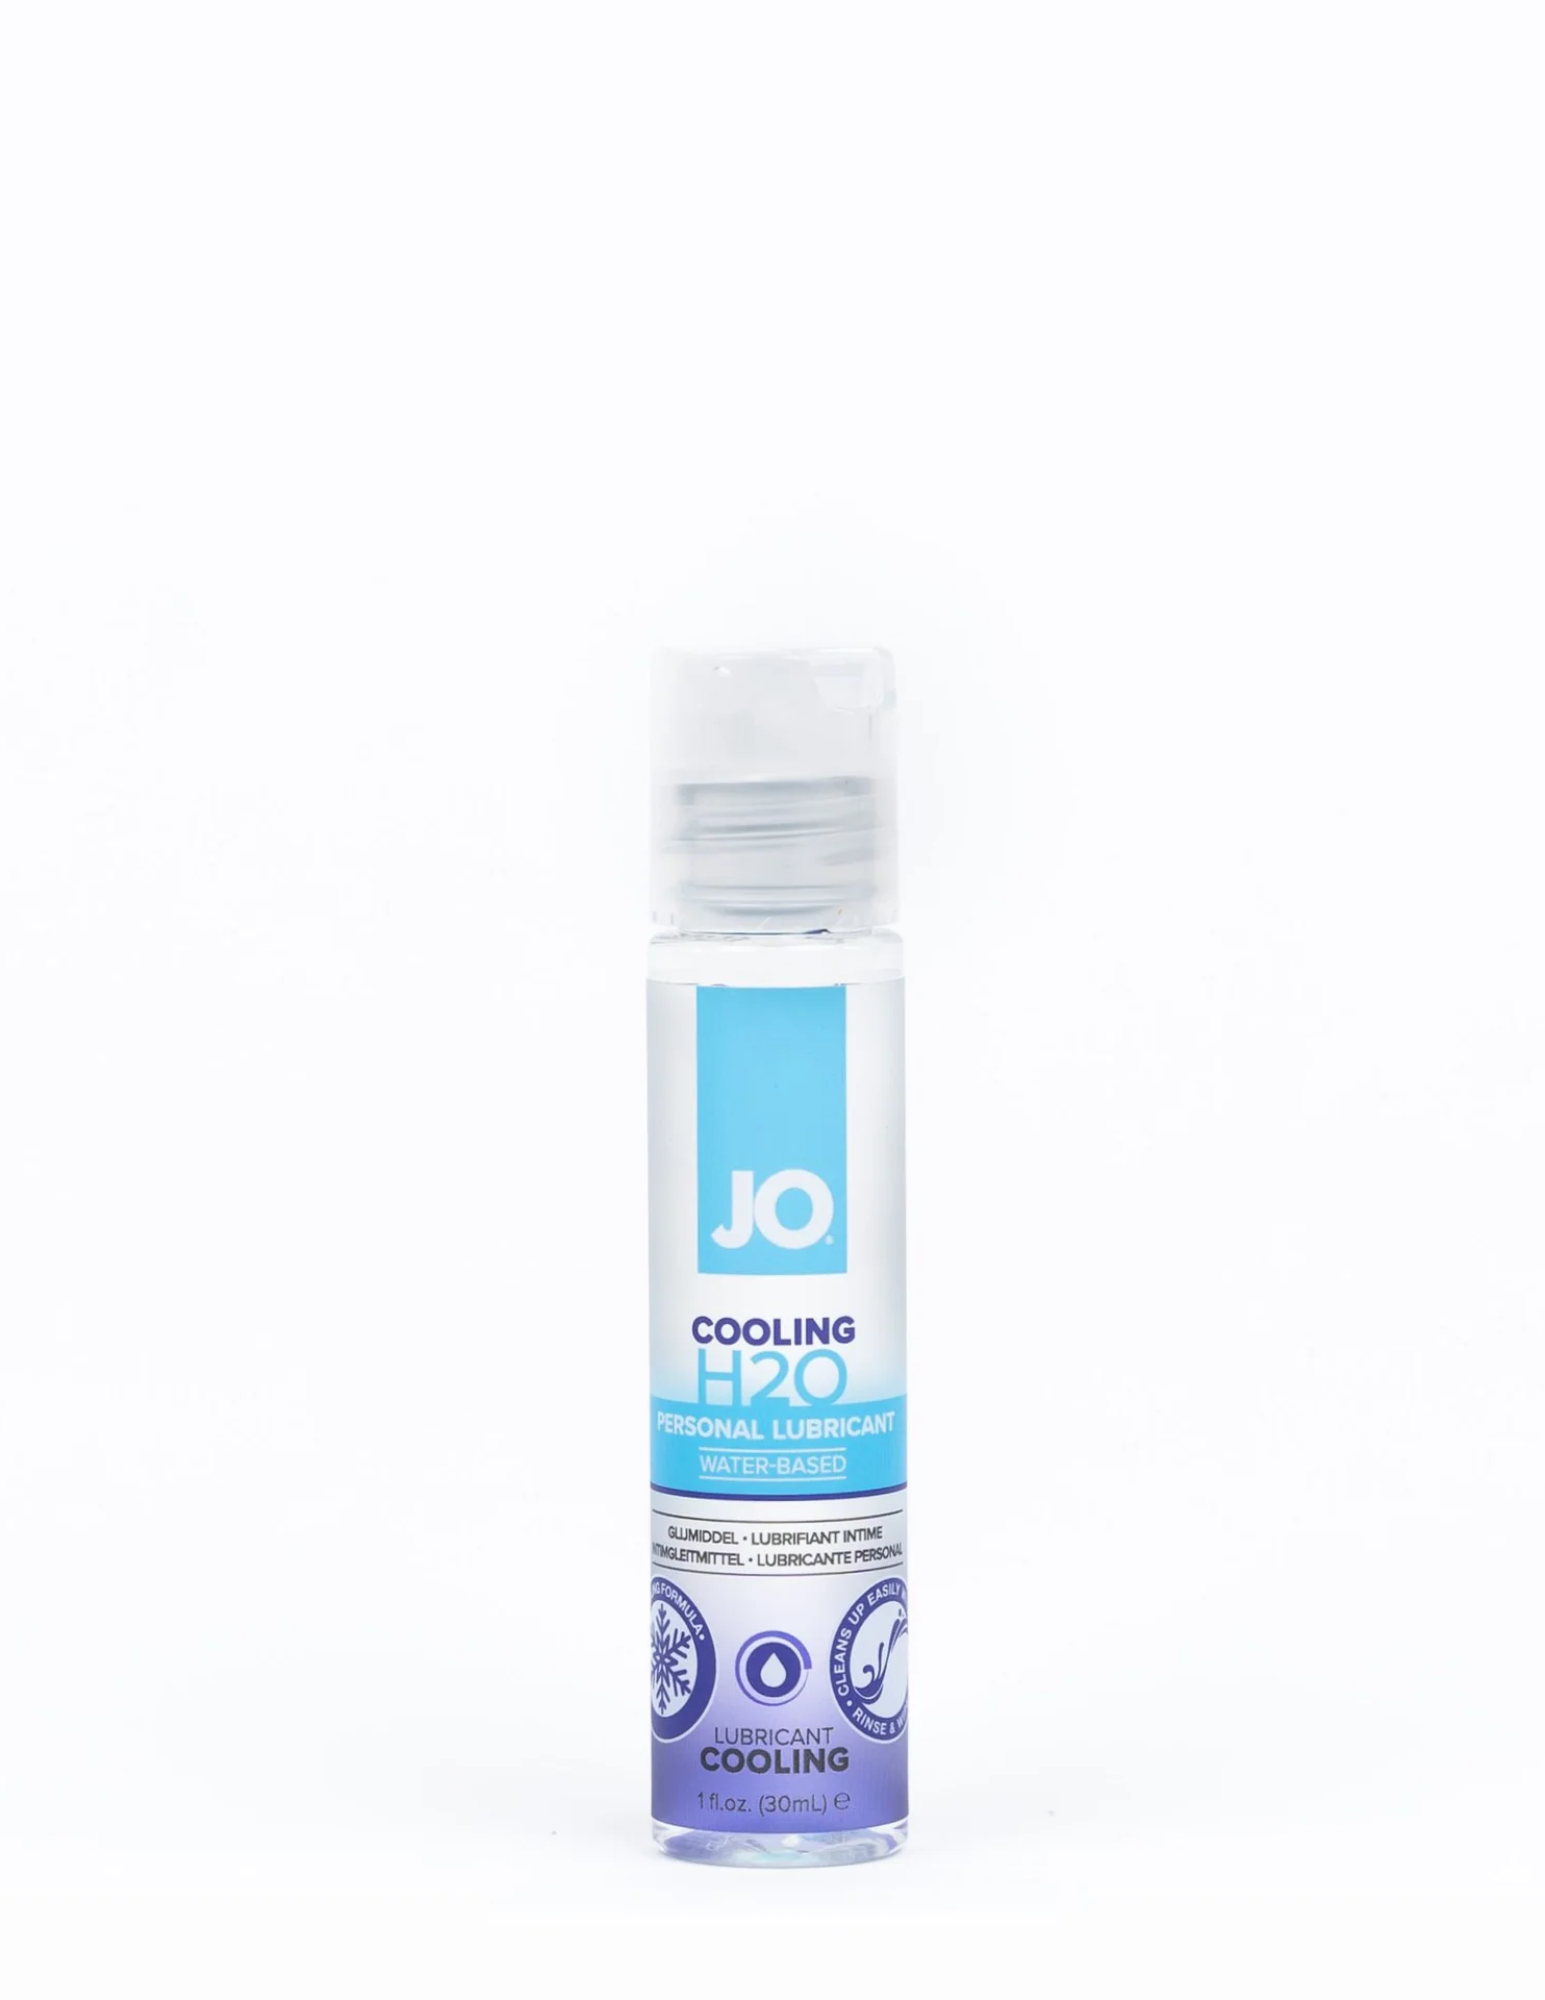 Image shows the front of the System Jo Cooling Water Based Lubricant 1oz bottle.